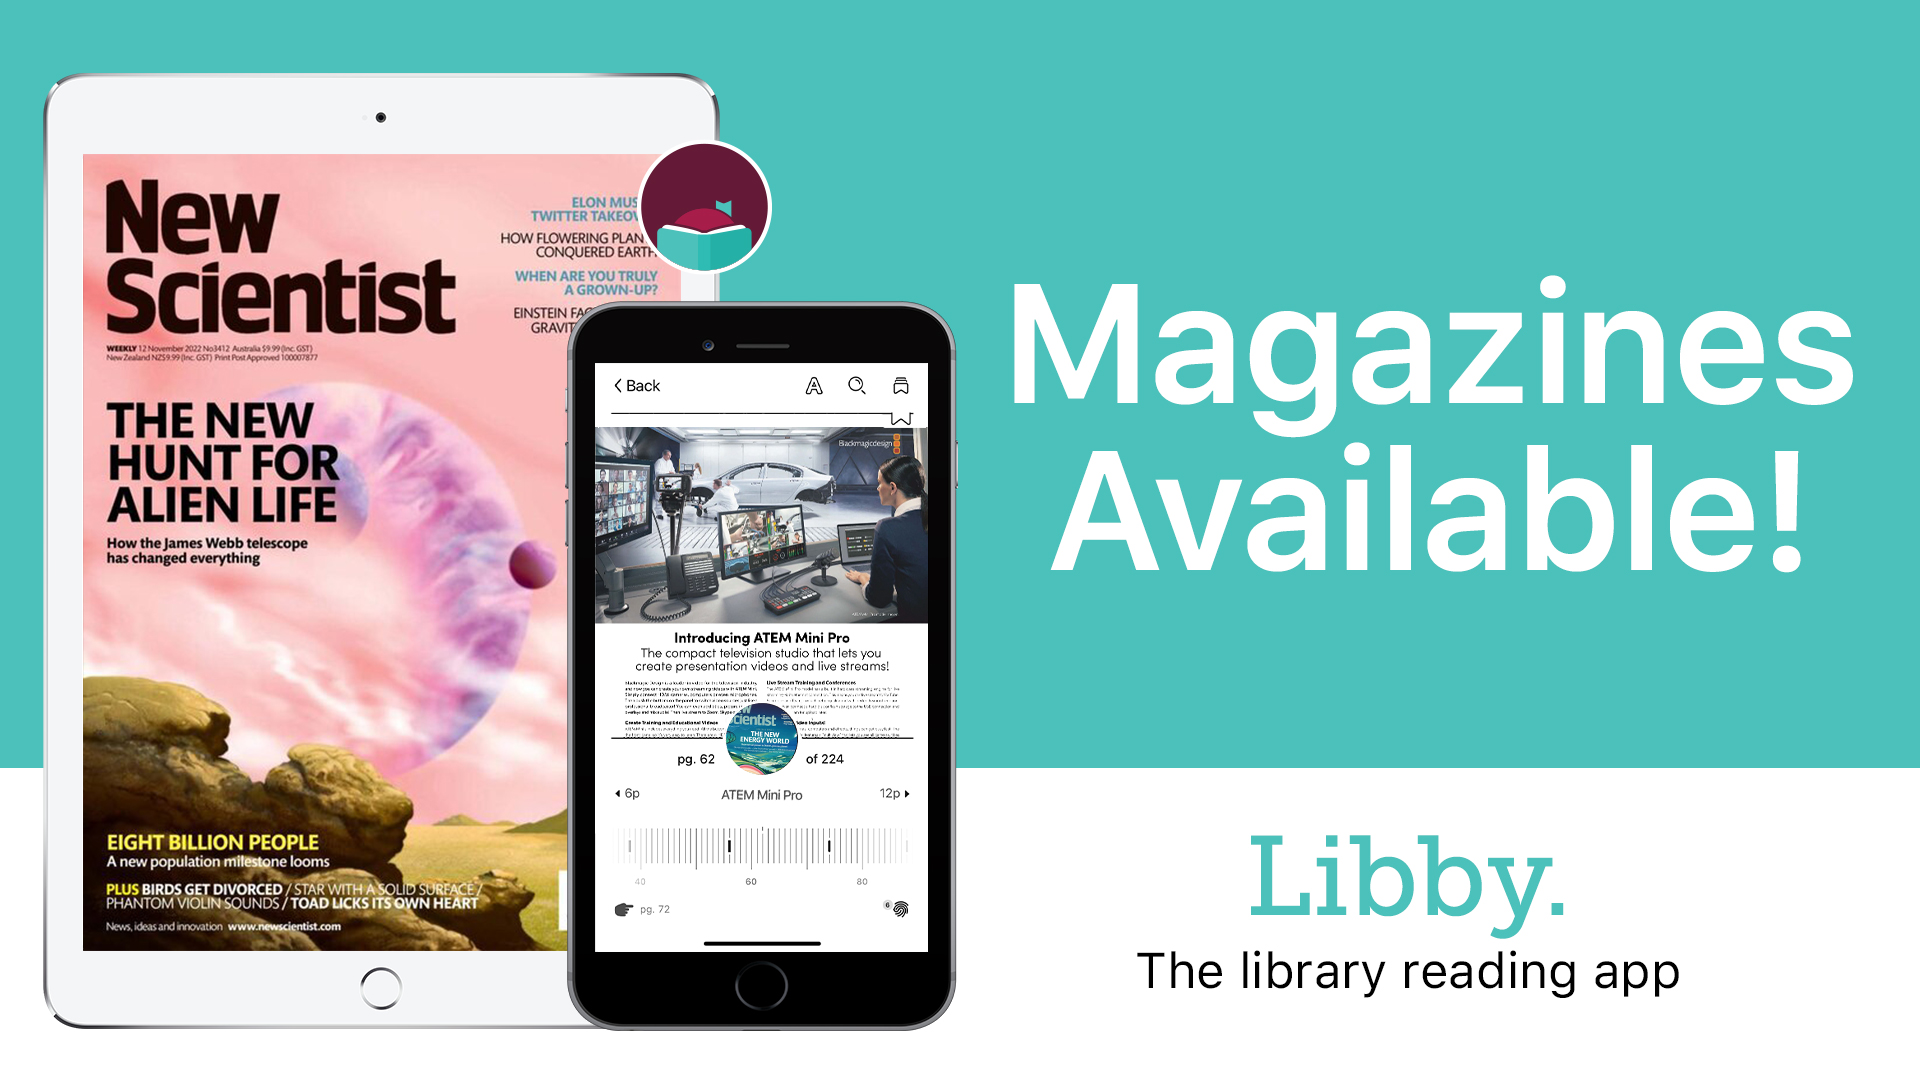 Cancel your magazine subscription now! Get Libby instead!